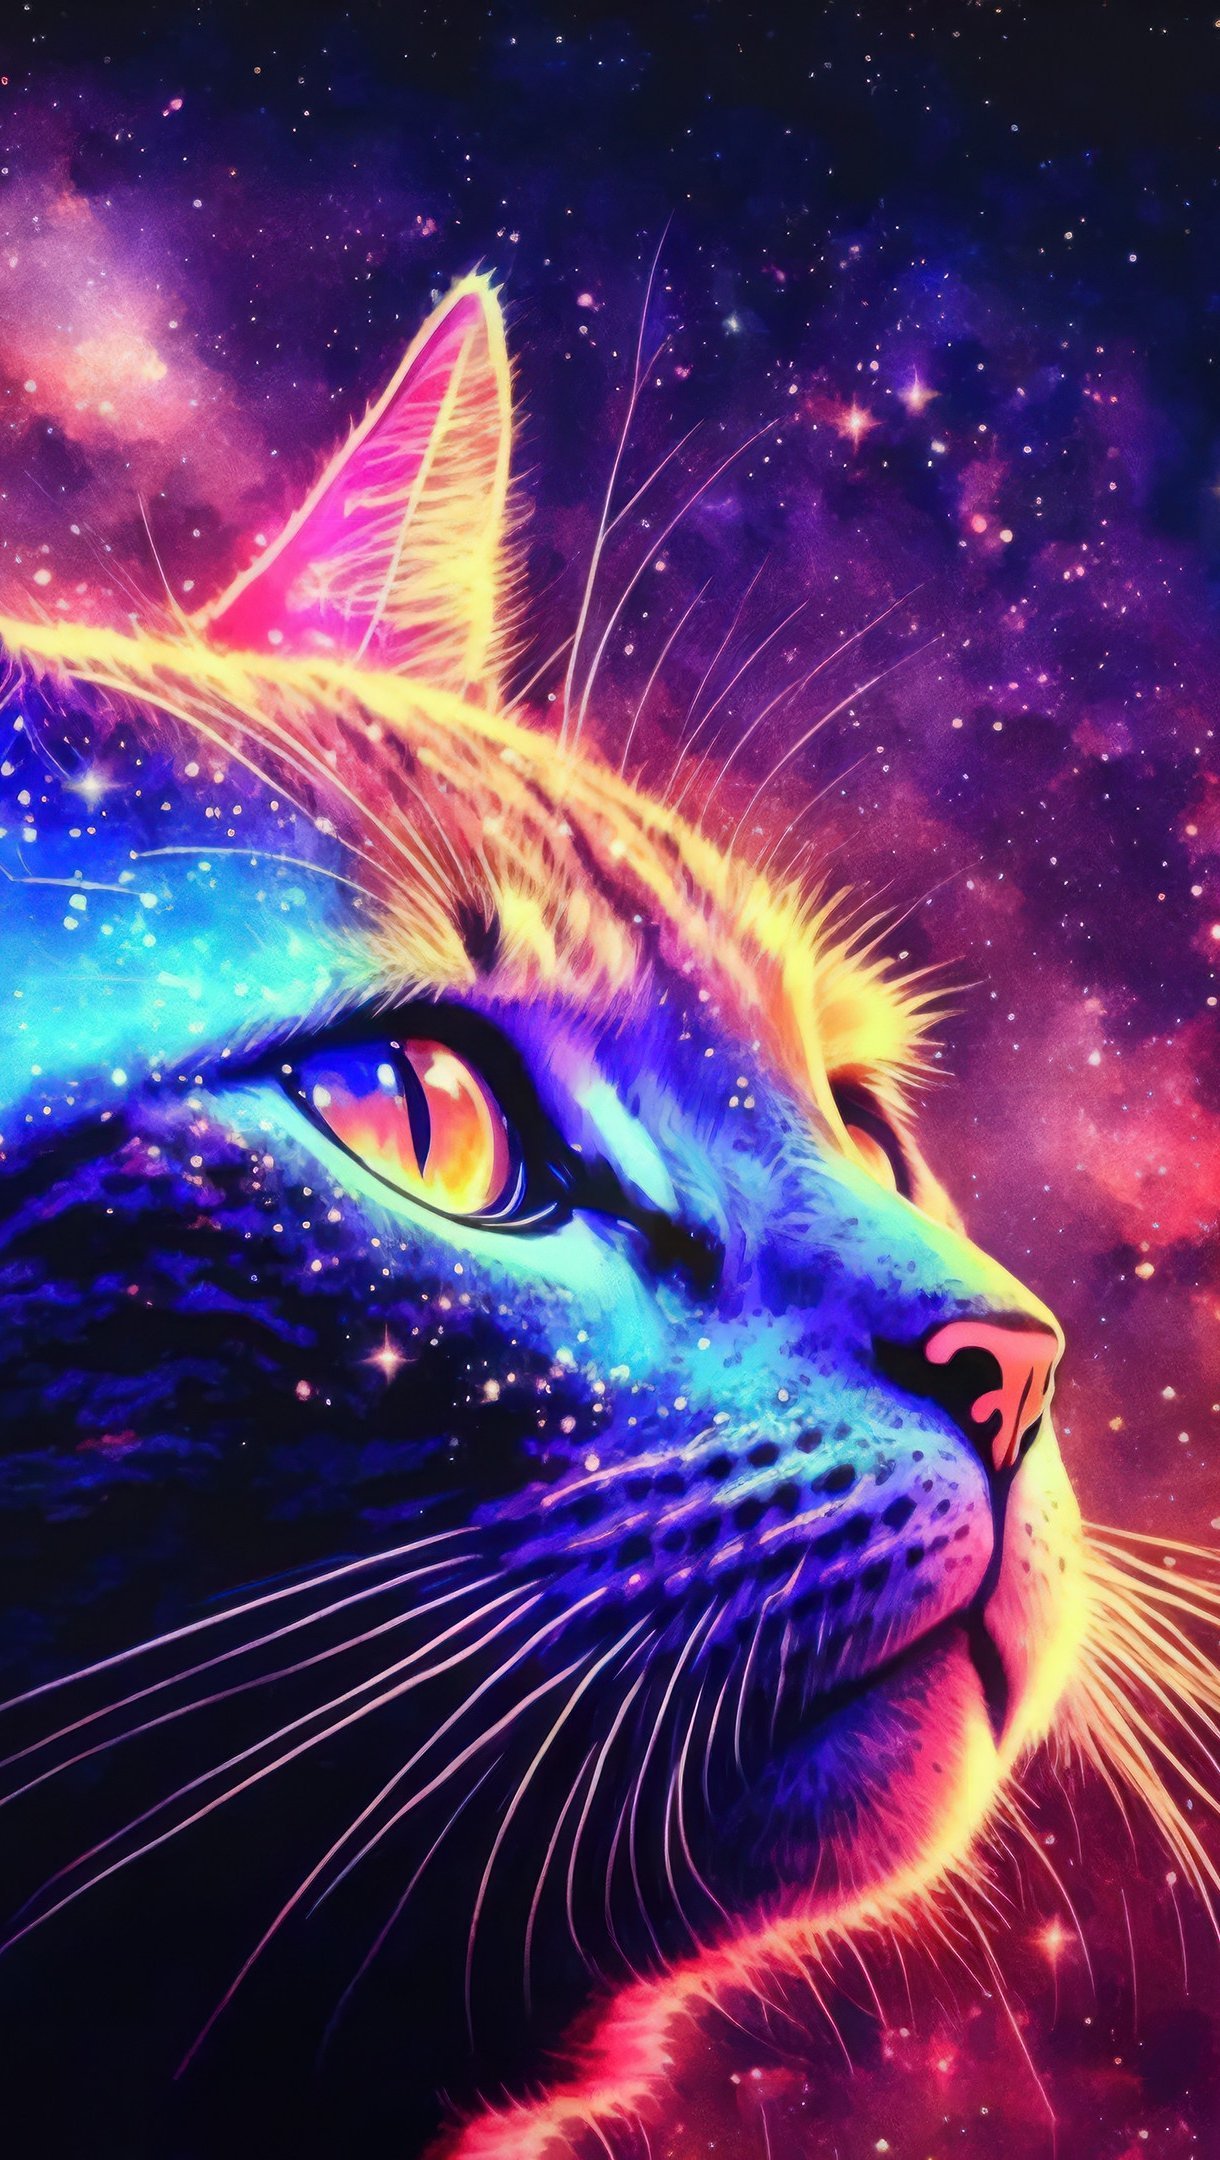 Cat with stars in the background Wallpaper 4k Ultra HD ID:11524